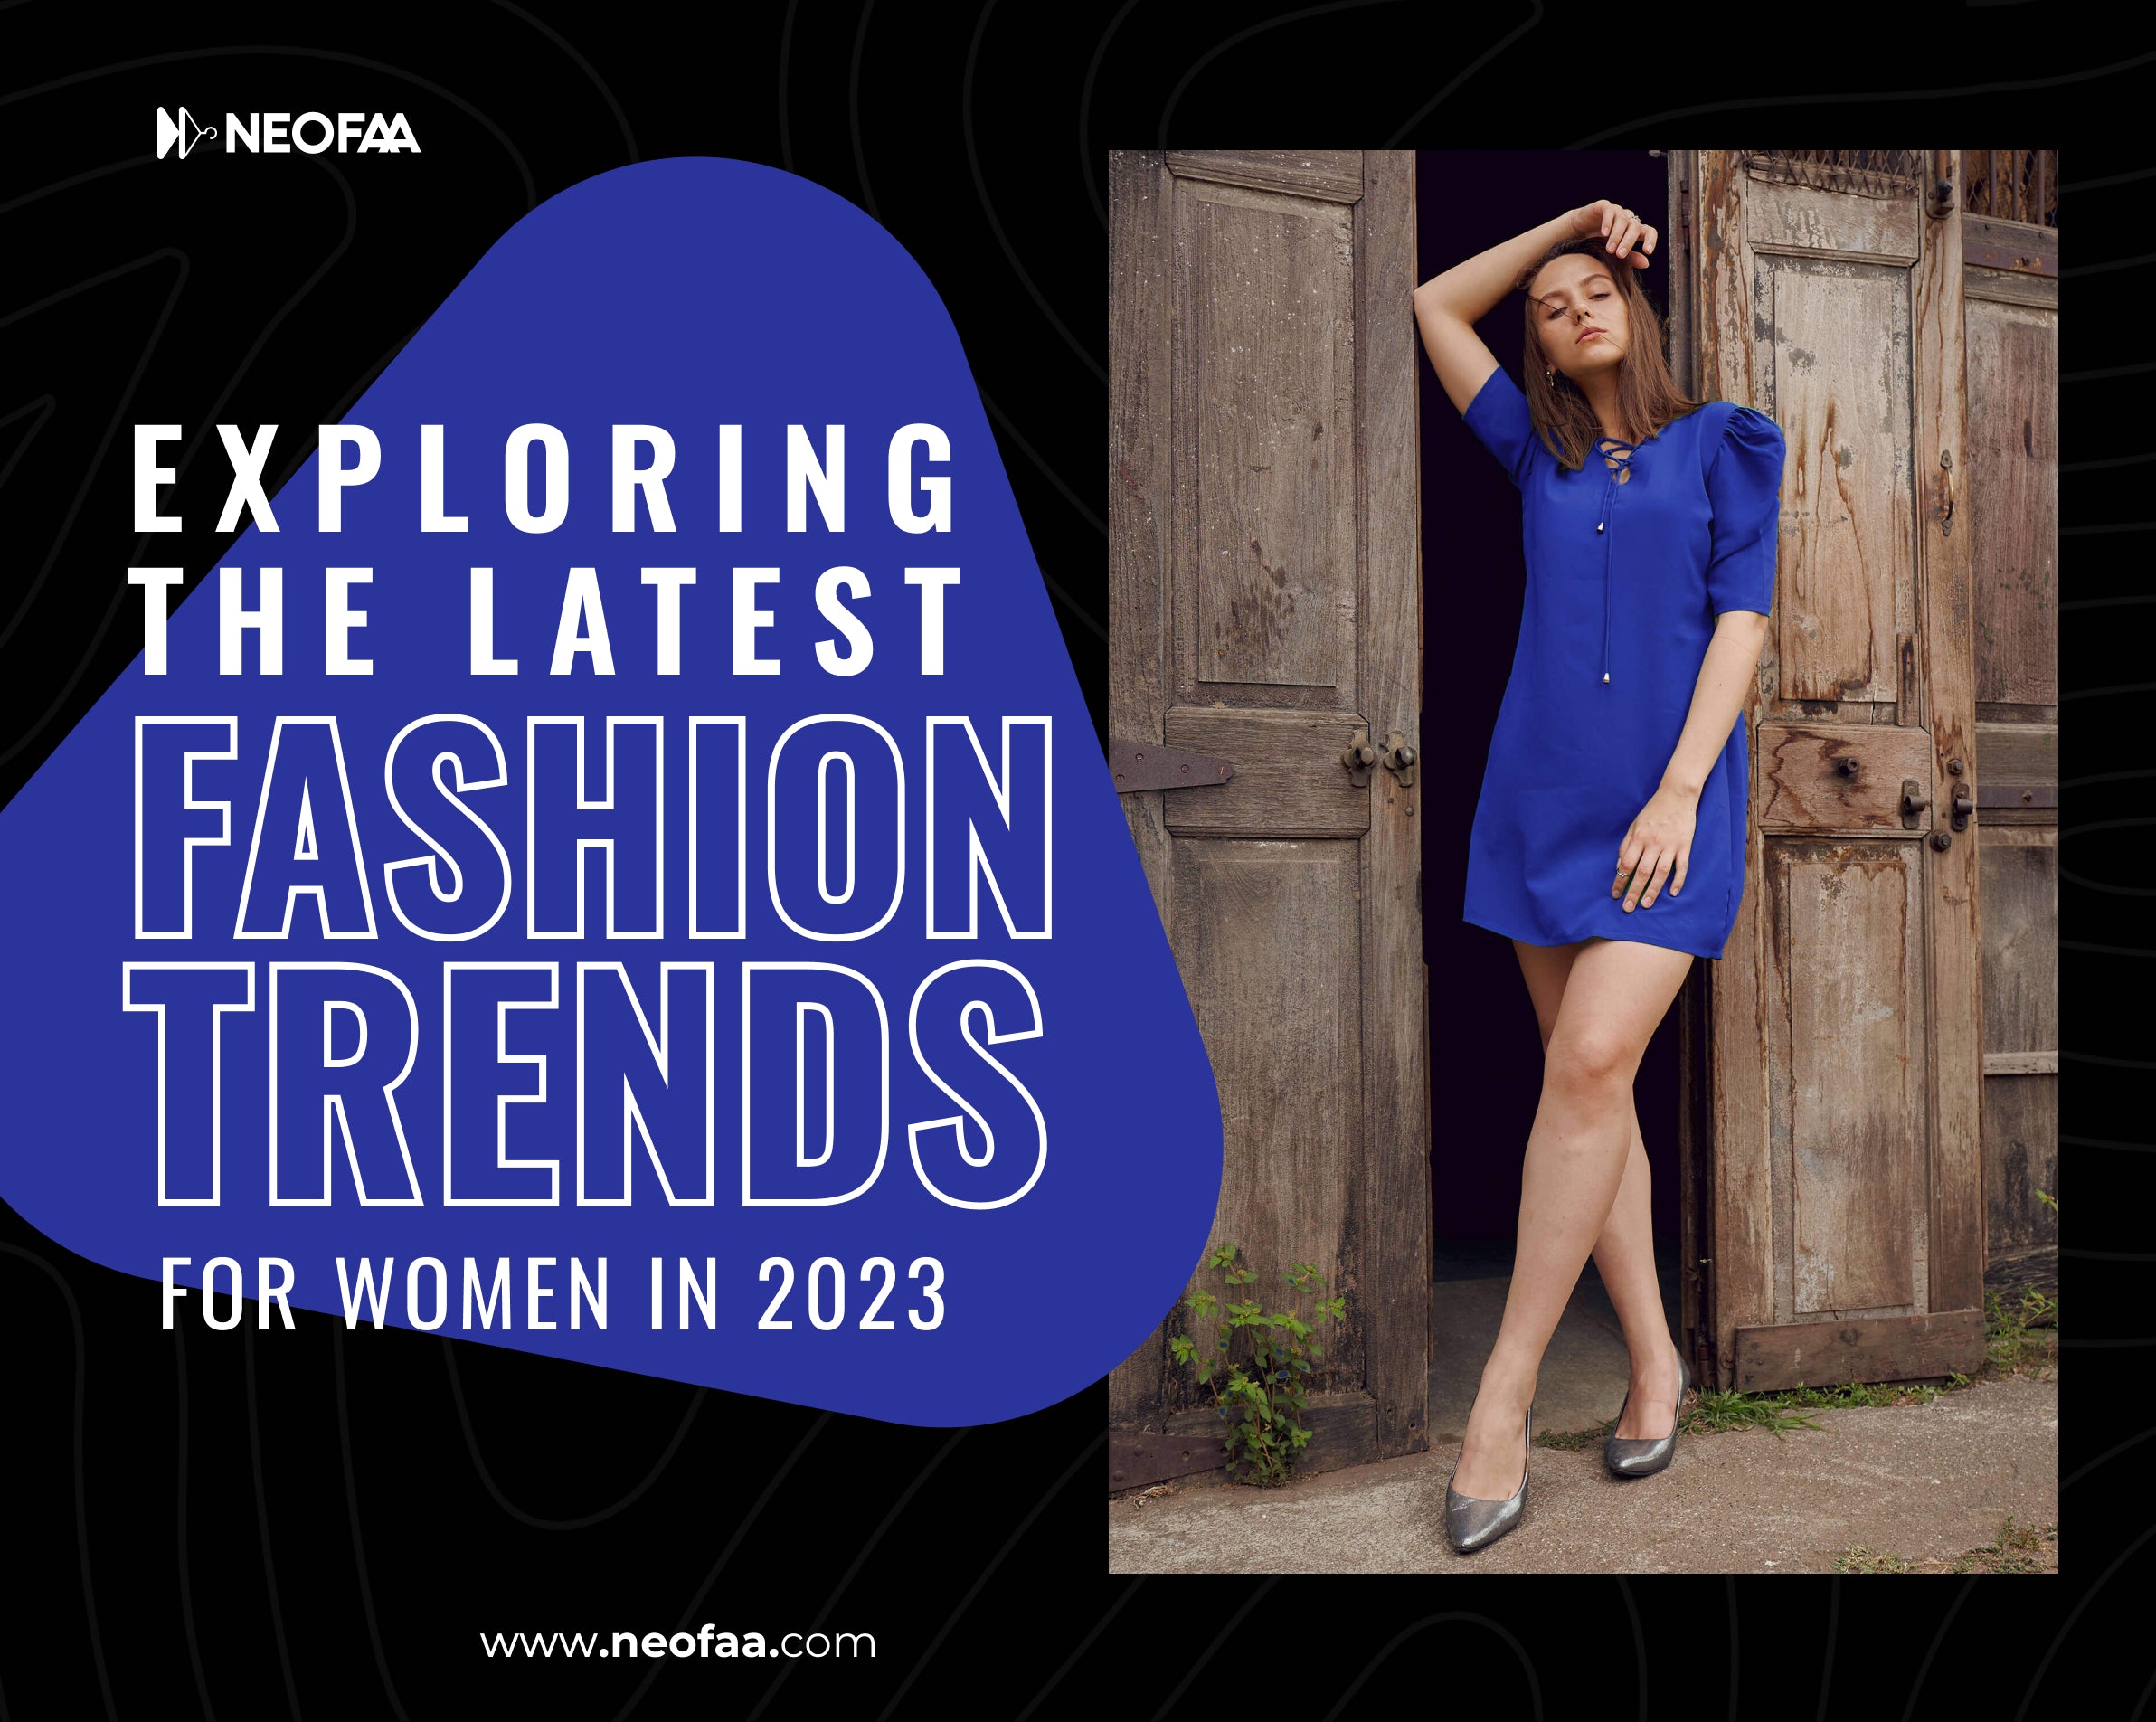 Exploring the Latest Fashion Trends for Women in 2023